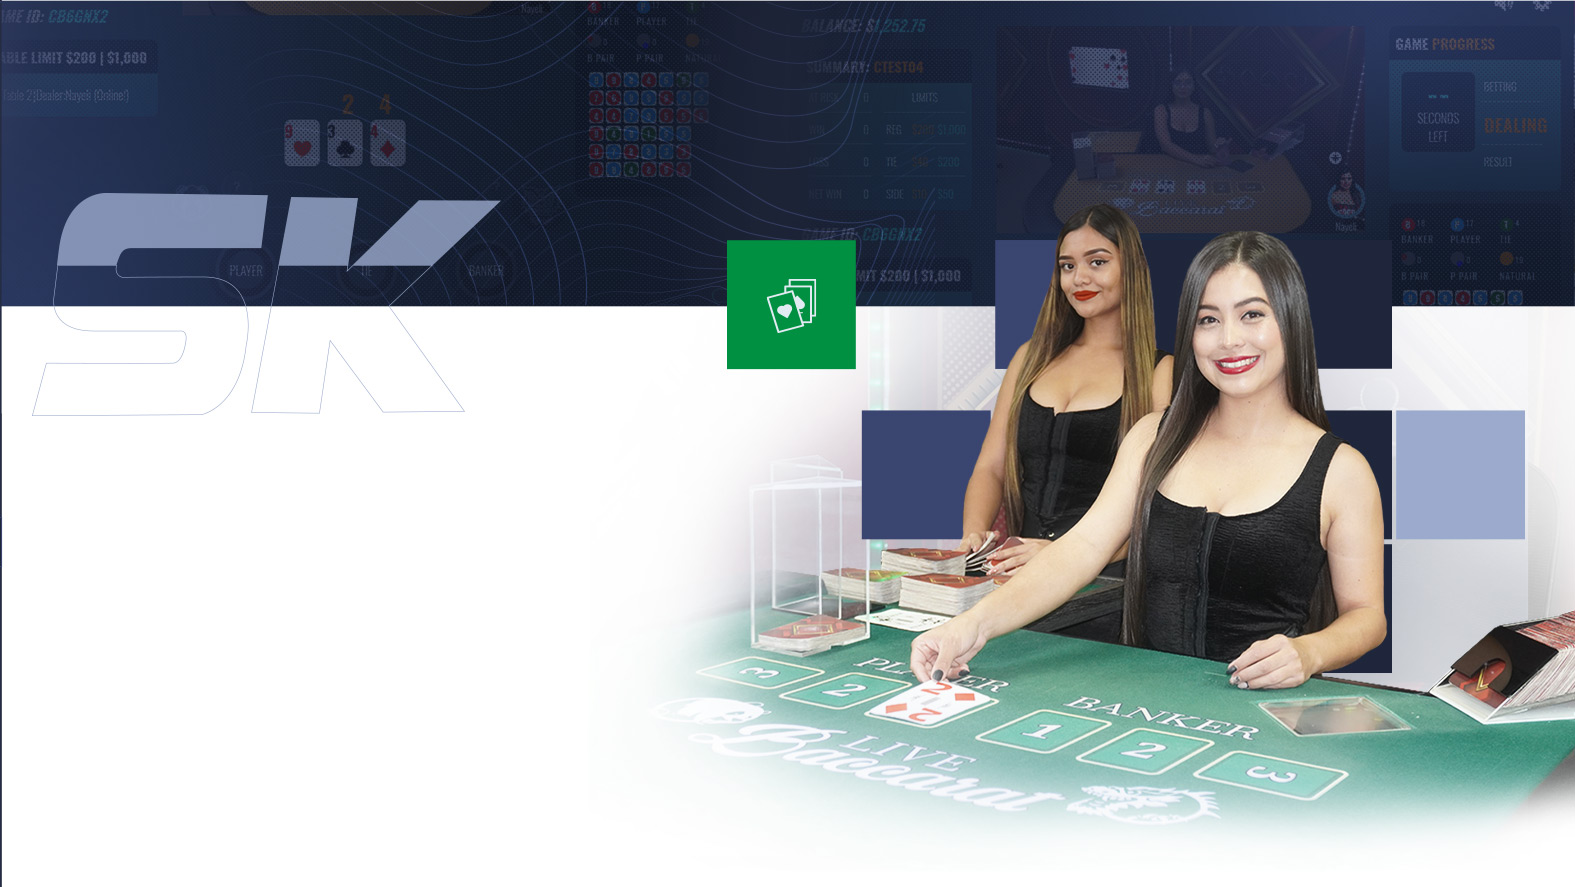 What Does an Online Live Dealer Casino Look Like?